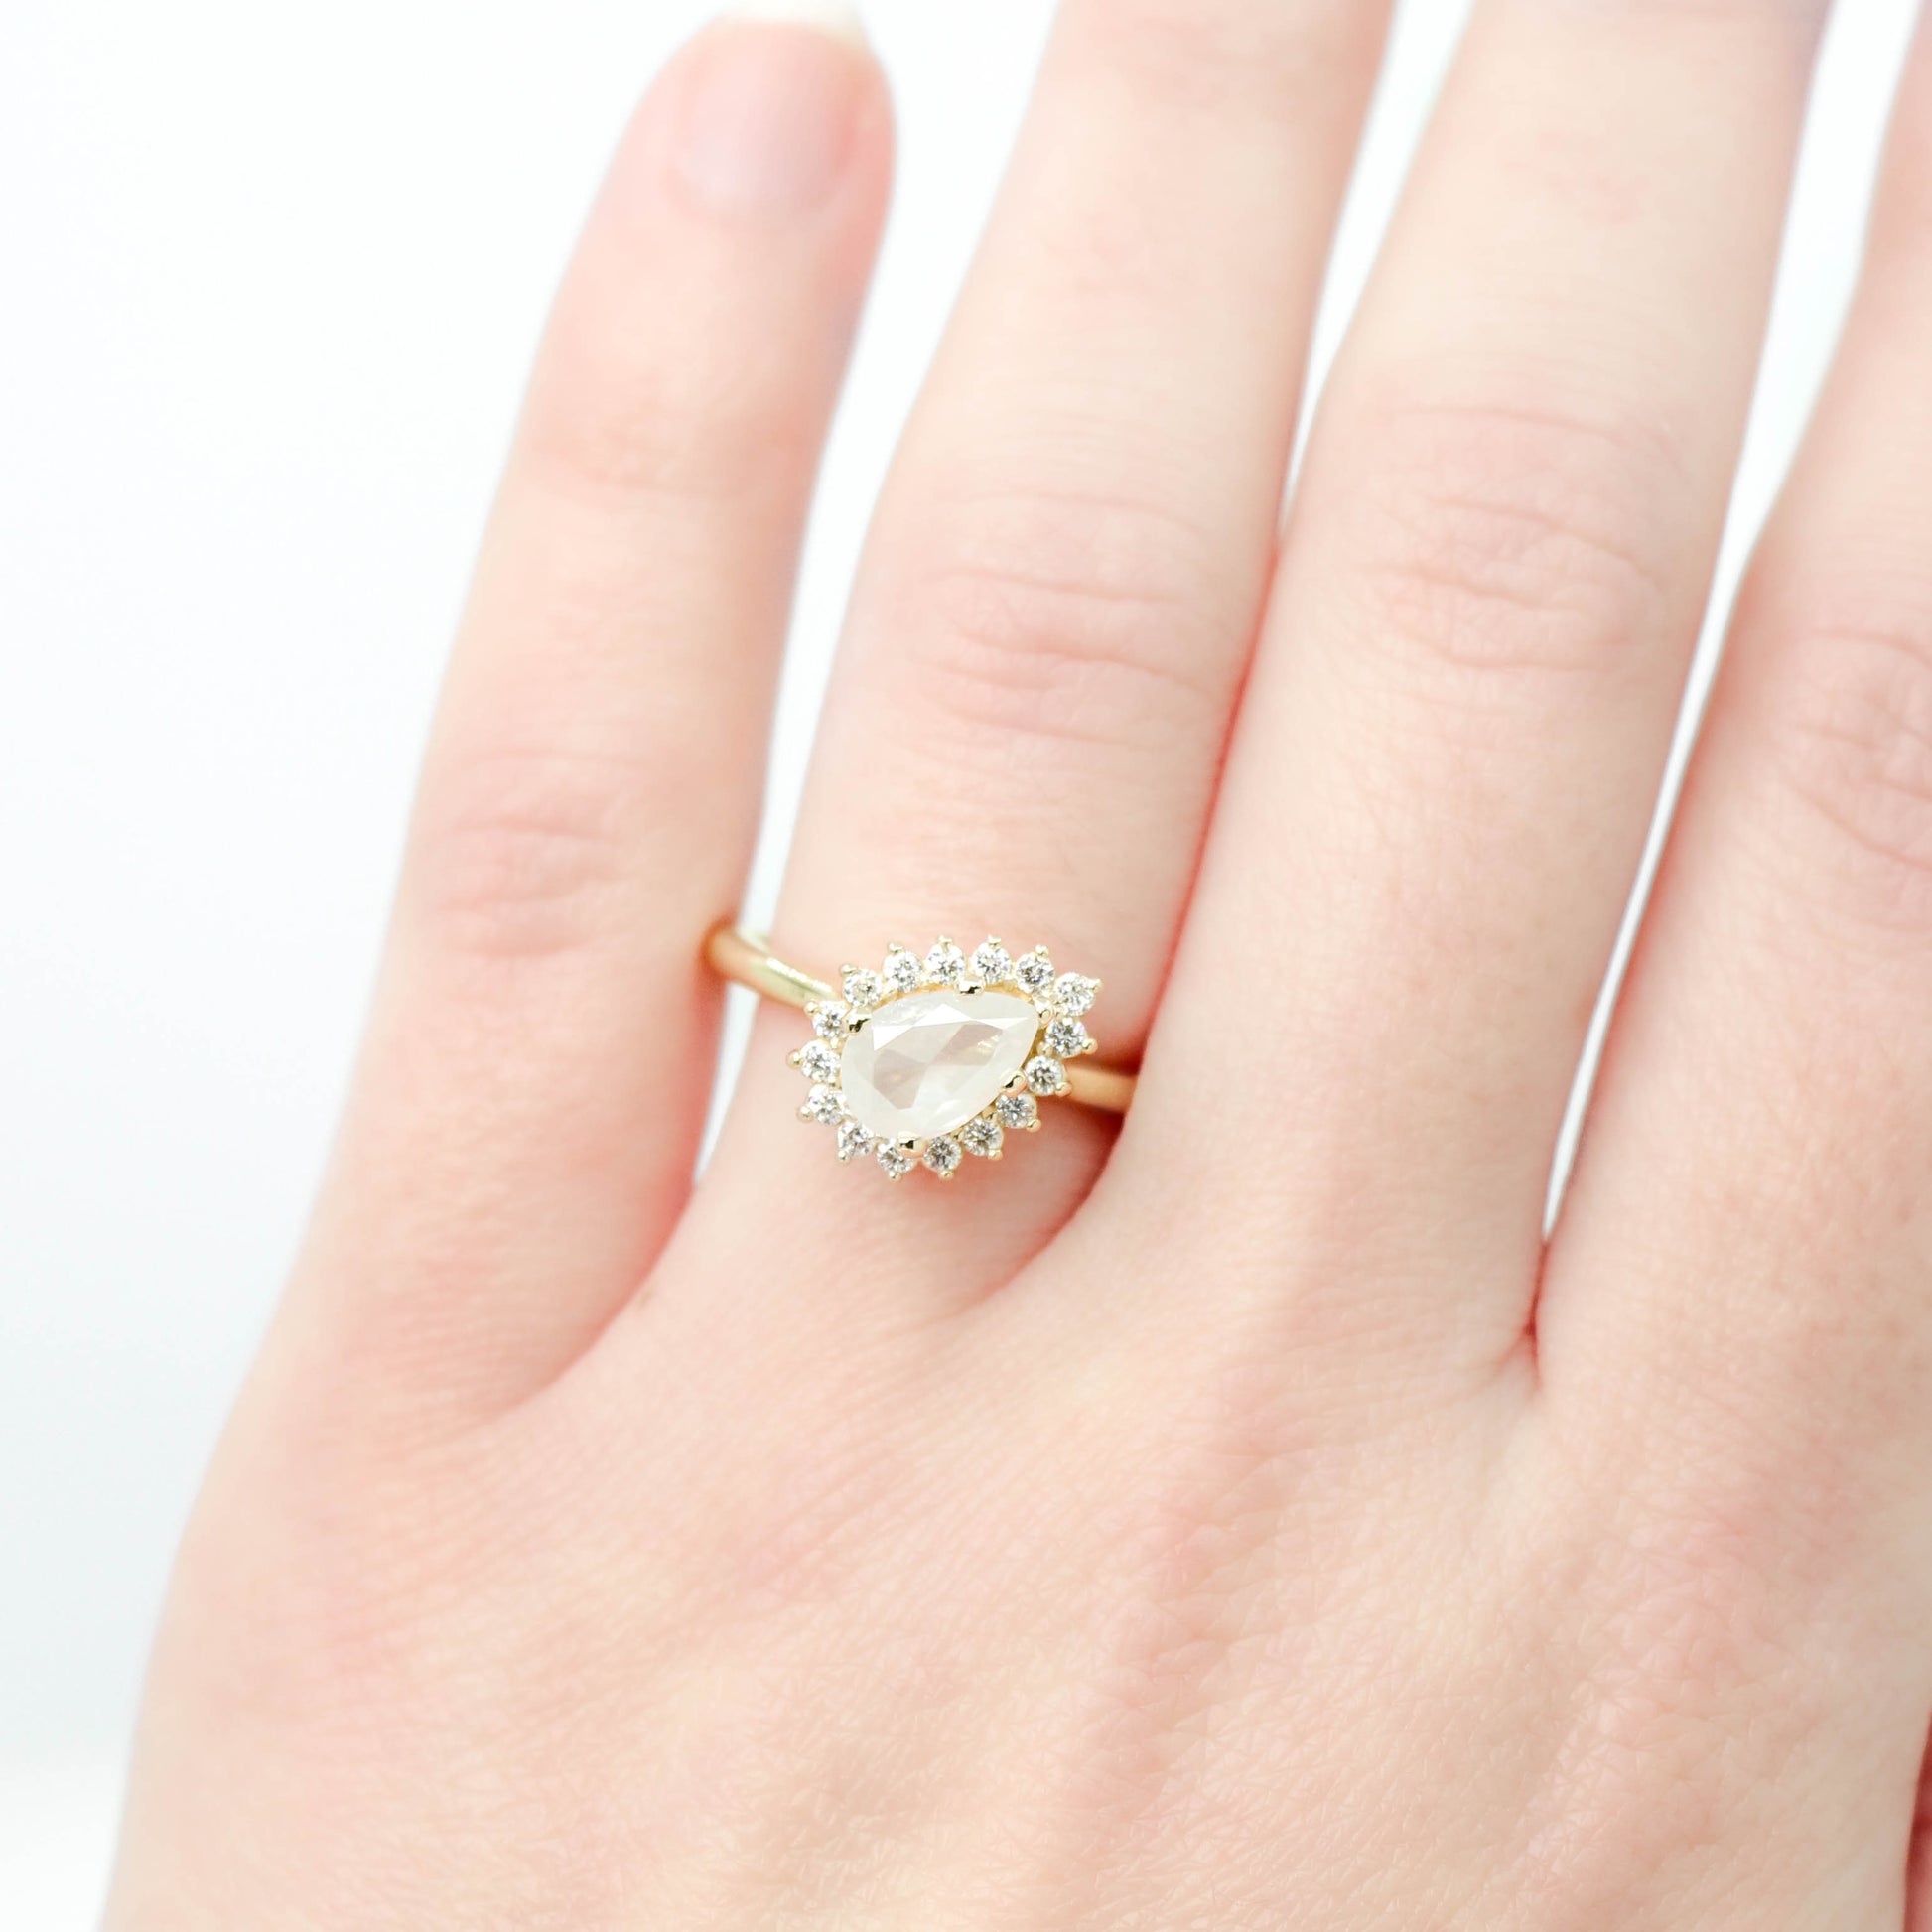 Velma Ring with a 1.30 Carat Misty White Pear Diamond and White Diamond Accents in 14k Yellow Gold - Ready to Size and Ship - Midwinter Co. Alternative Bridal Rings and Modern Fine Jewelry